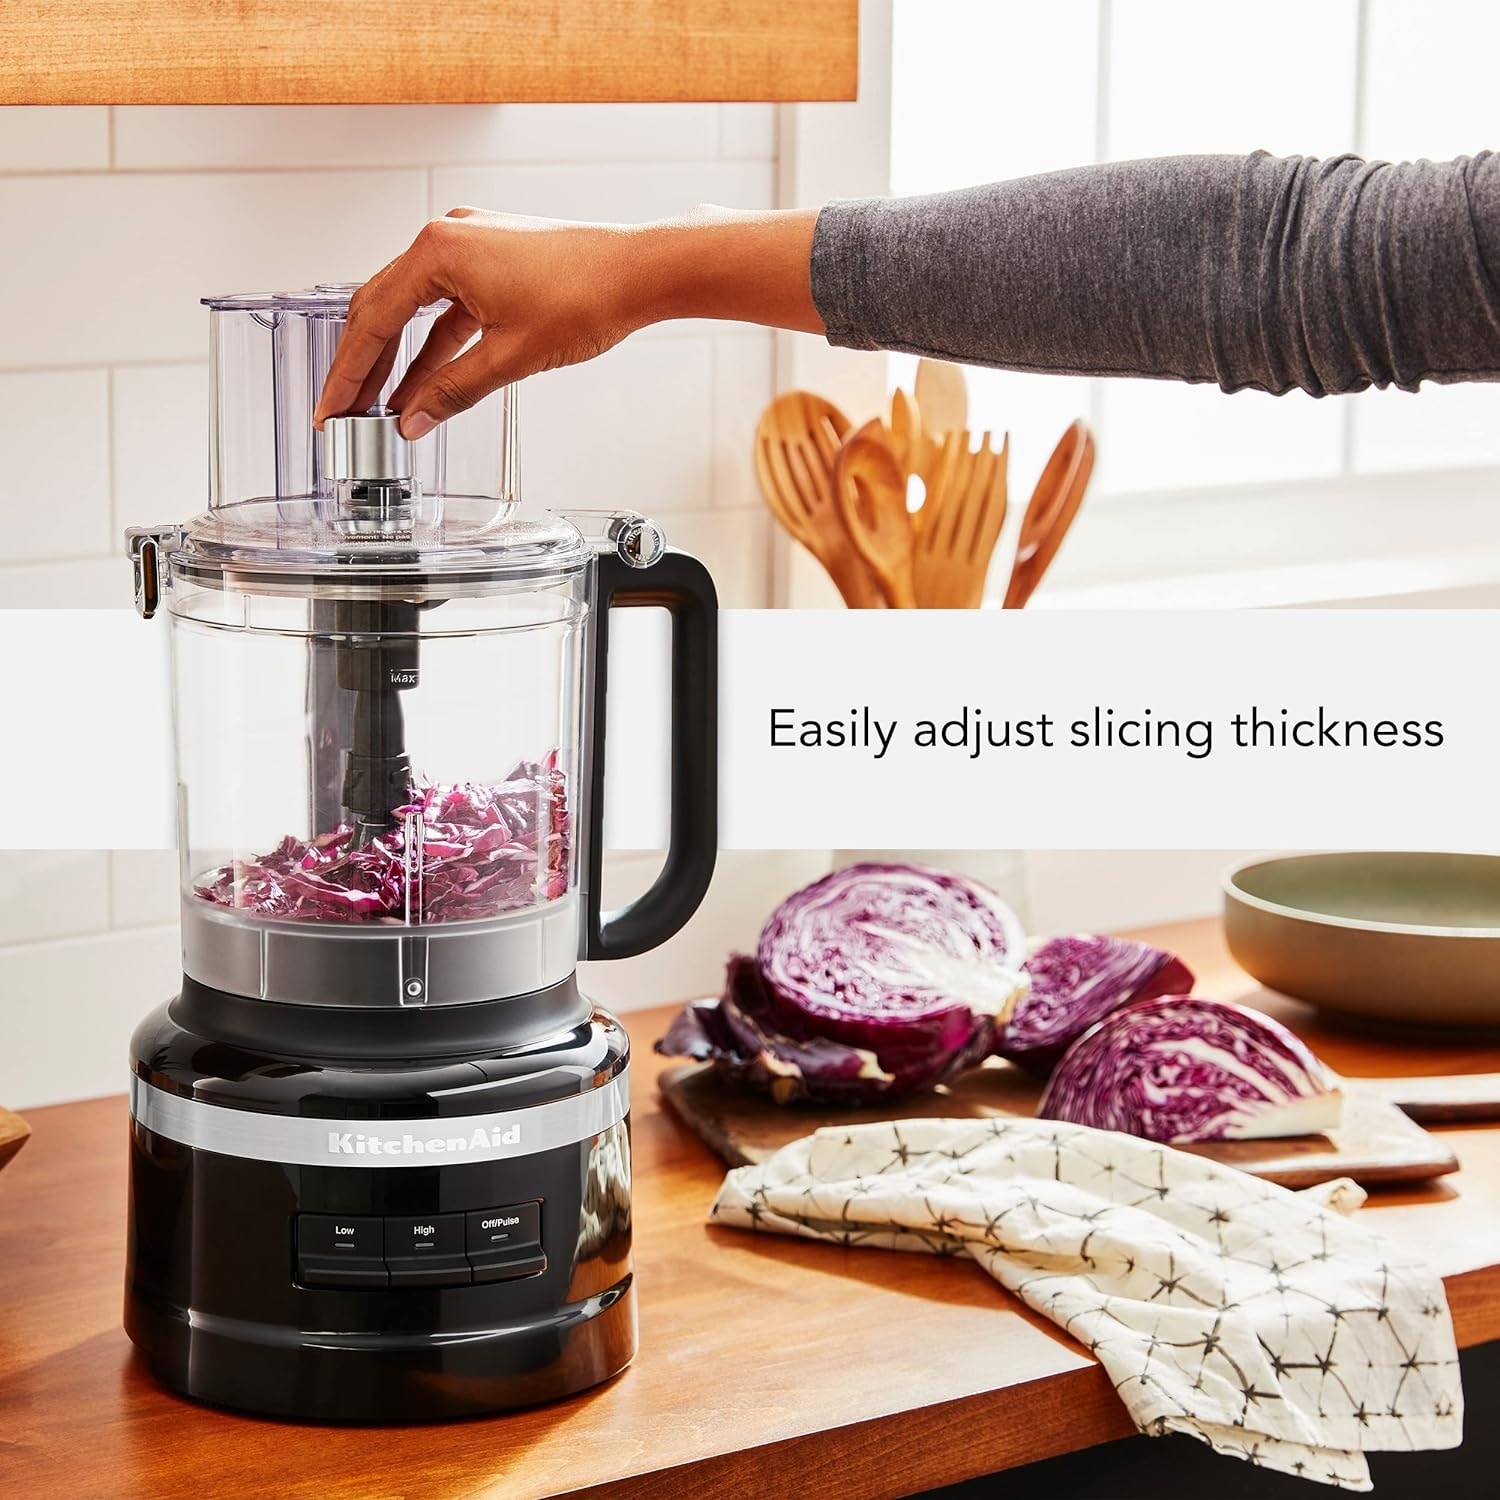 https://ak1.ostkcdn.com/images/products/is/images/direct/2f9f4dff9a792f54e36267cc495eda02ef4dd9e9/13-Cup-Food-Processor-with-Exact-Slice-Lever.jpg